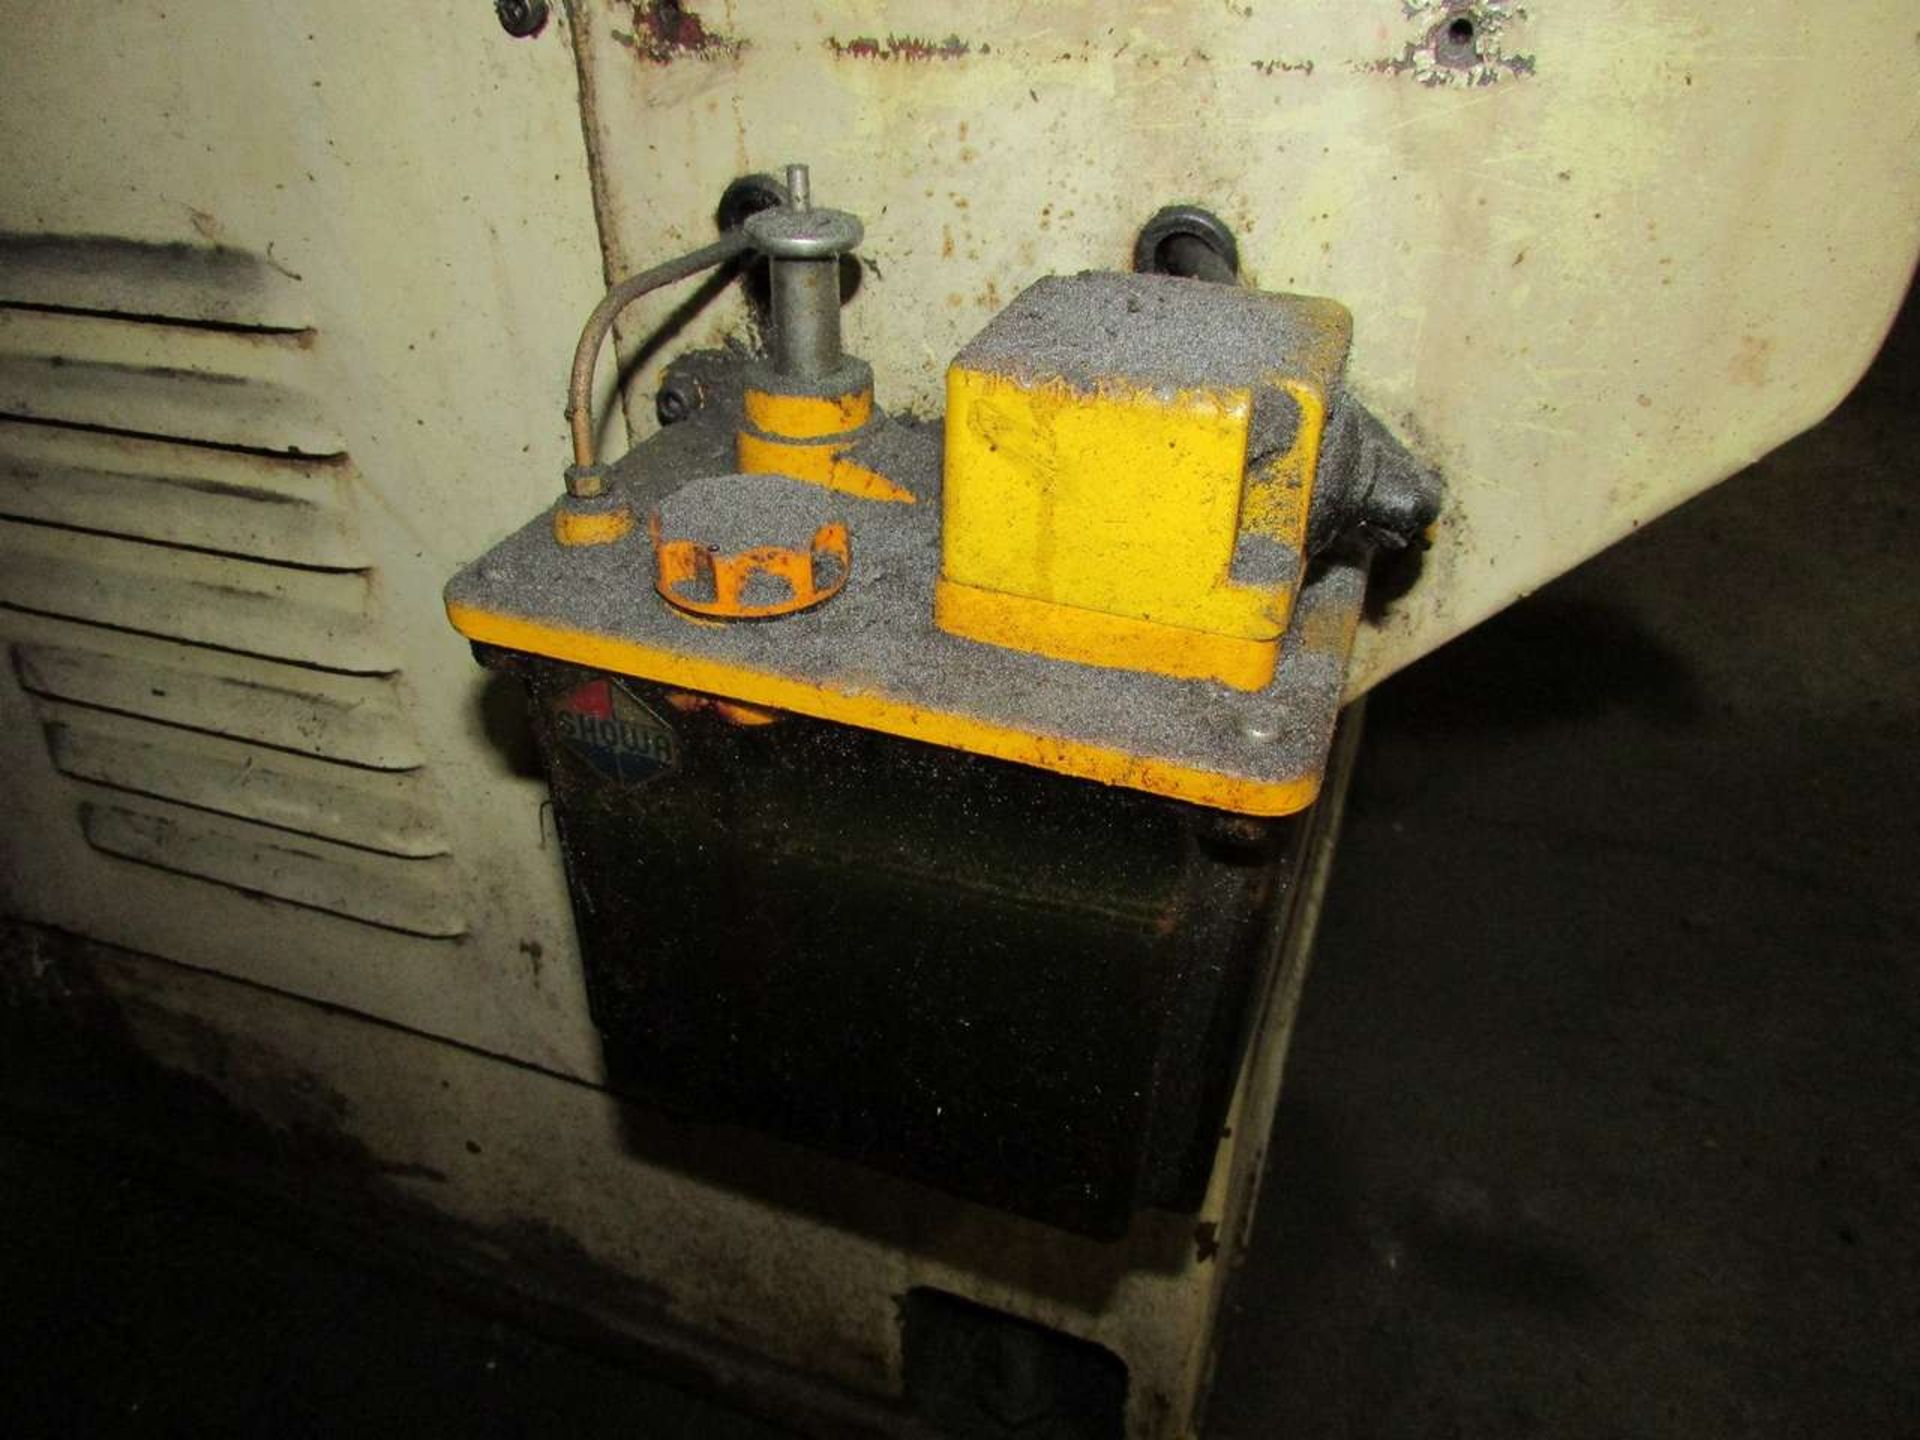 1987 Kent KGS-360AHD Surface Grinder - Image 10 of 12